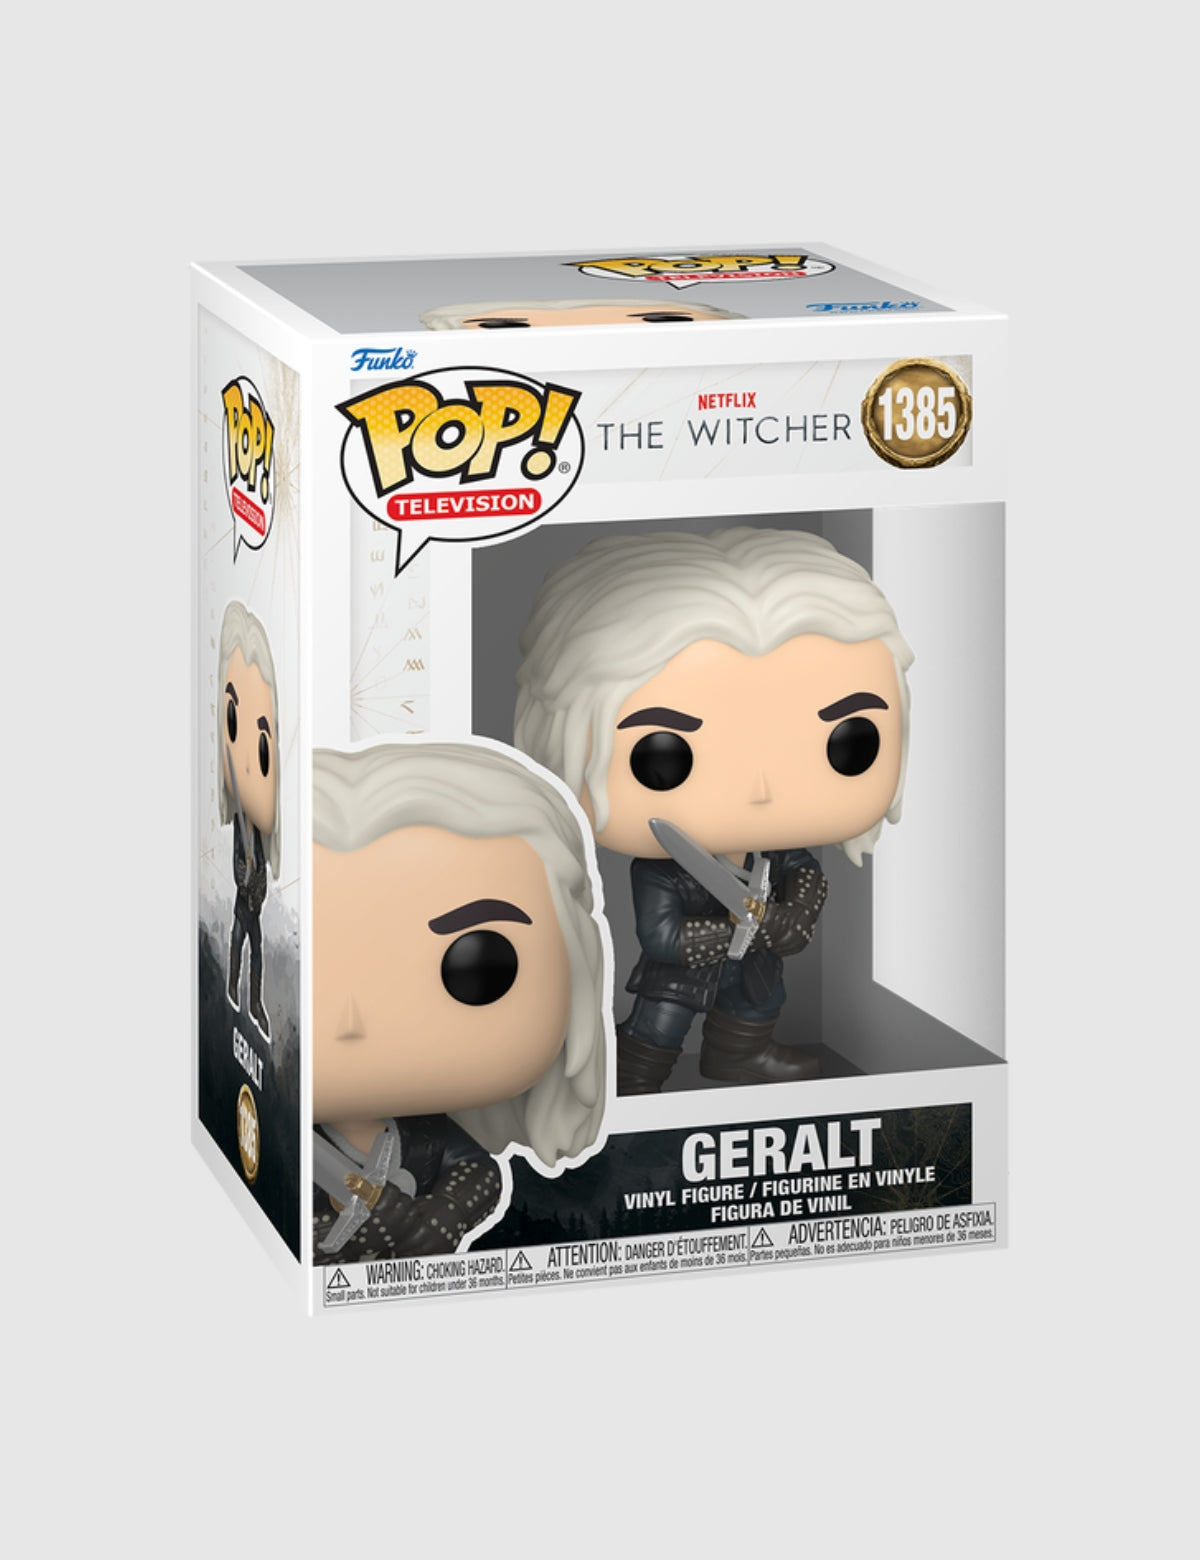 The Witcher': New Funko Pop! Figures Available for Pre-Order